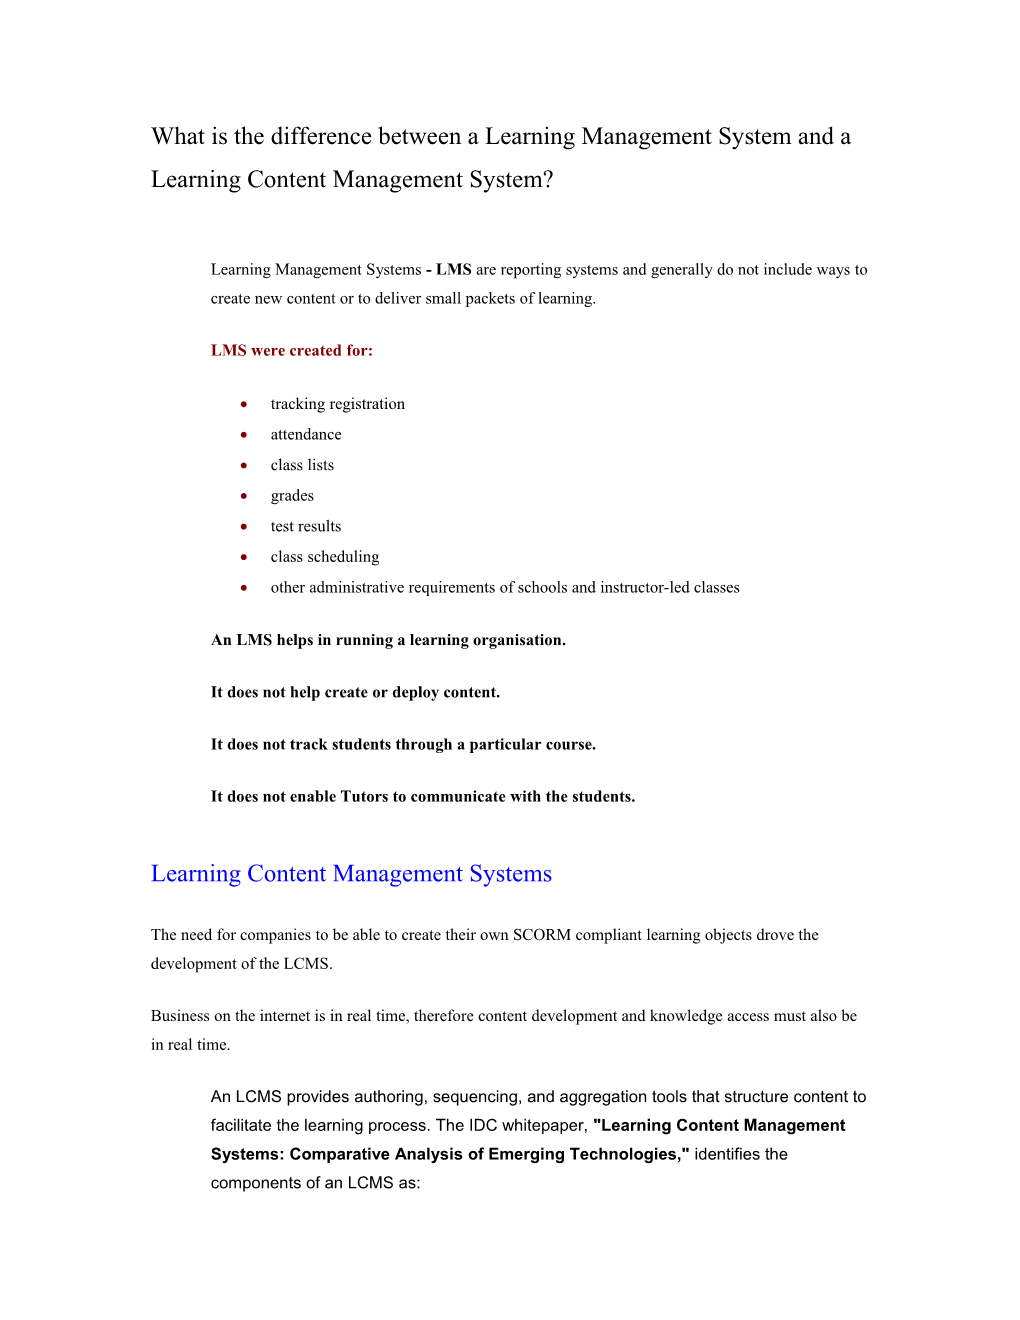 What Is the Difference Between a Learning Management System and a Learning Content Management